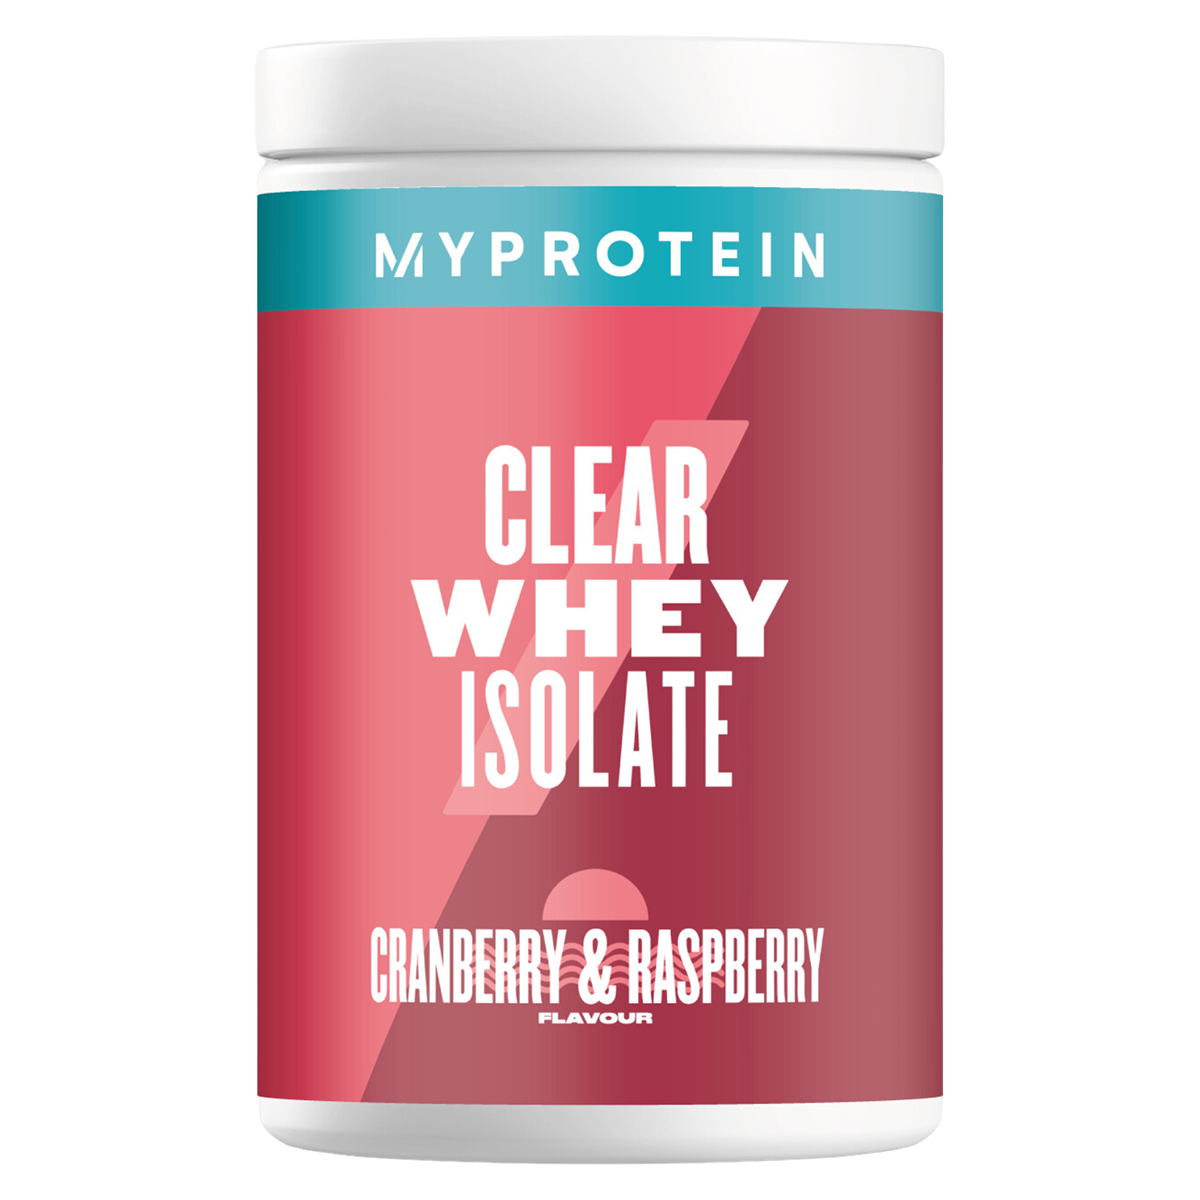 Myprotein_Clearwheyisolate_Cranberry-&Amp;-Raspberry